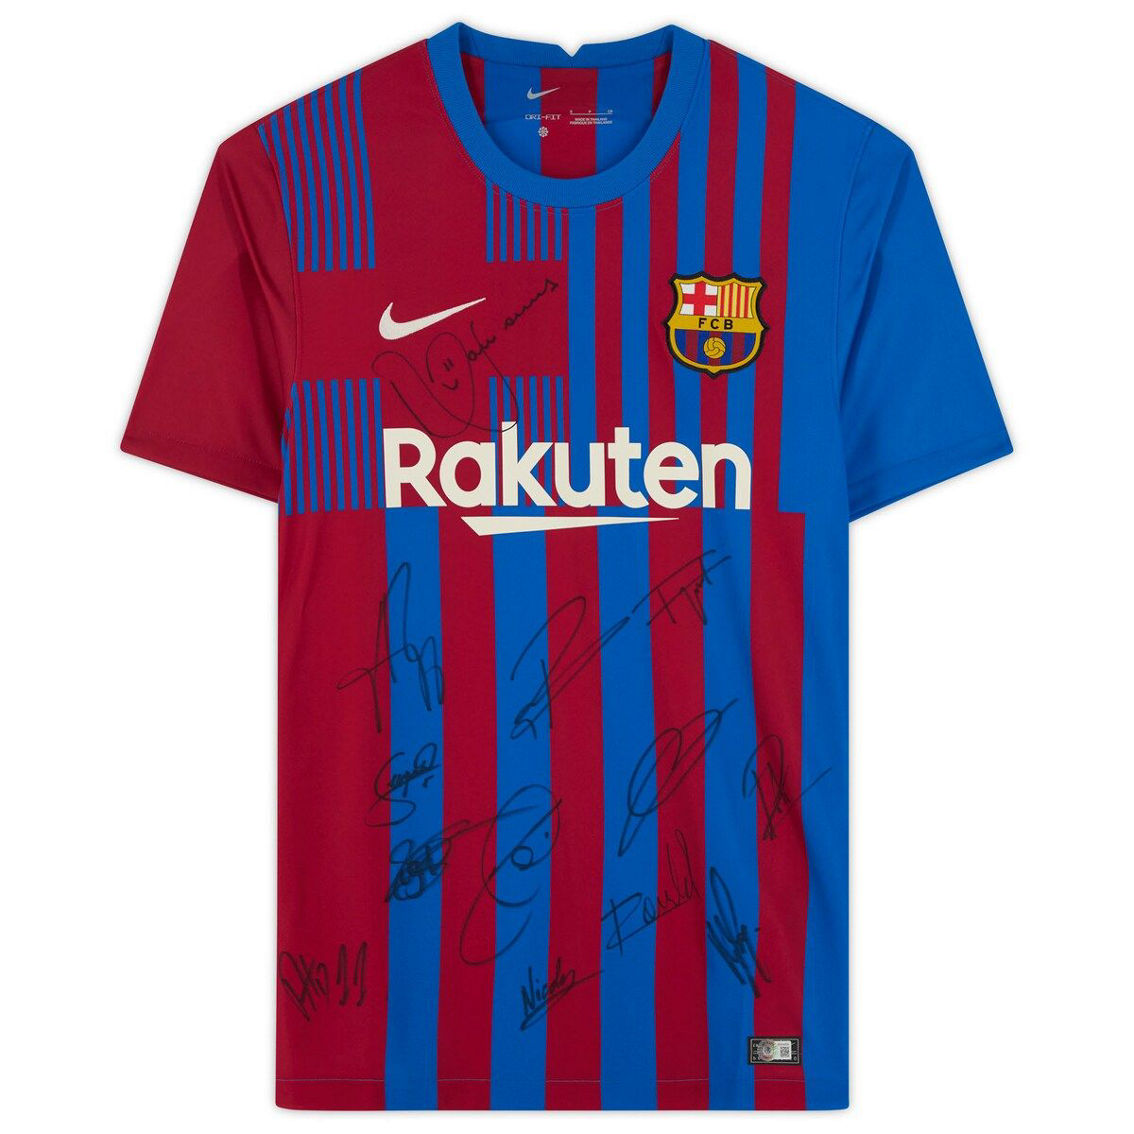 Fanatics Authentic Barcelona Multi-Signed 2021-22 Home Jersey - Image 3 of 4